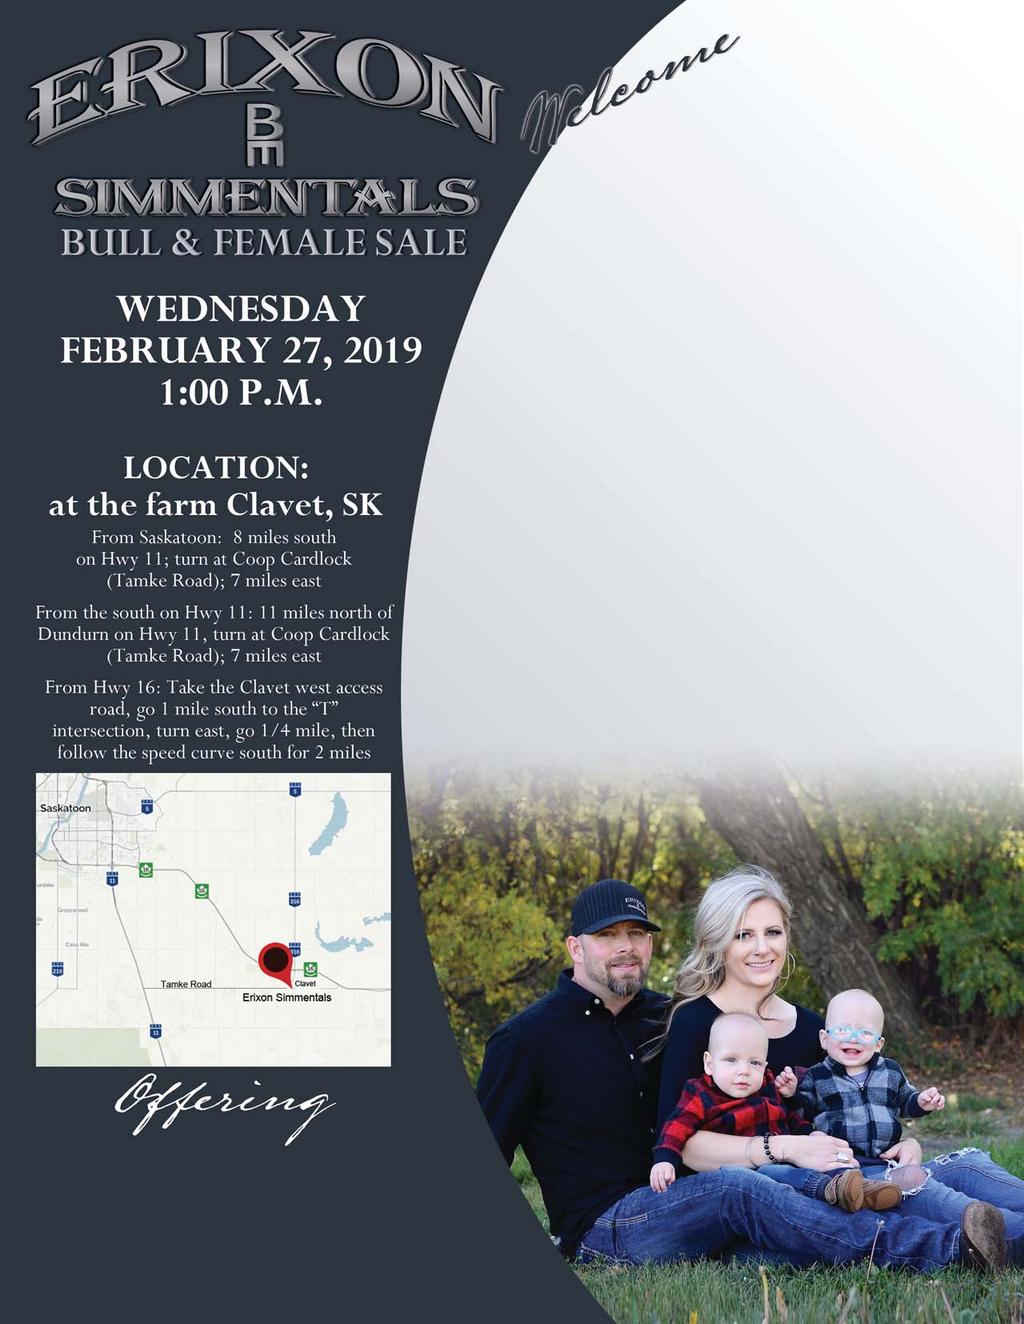 On behalf of Dave and myself I would like to welcome fellow seed stock producers and commercial cattlemen to the 2019 edition of the Erixon Simmentals Bull & Female Sale.